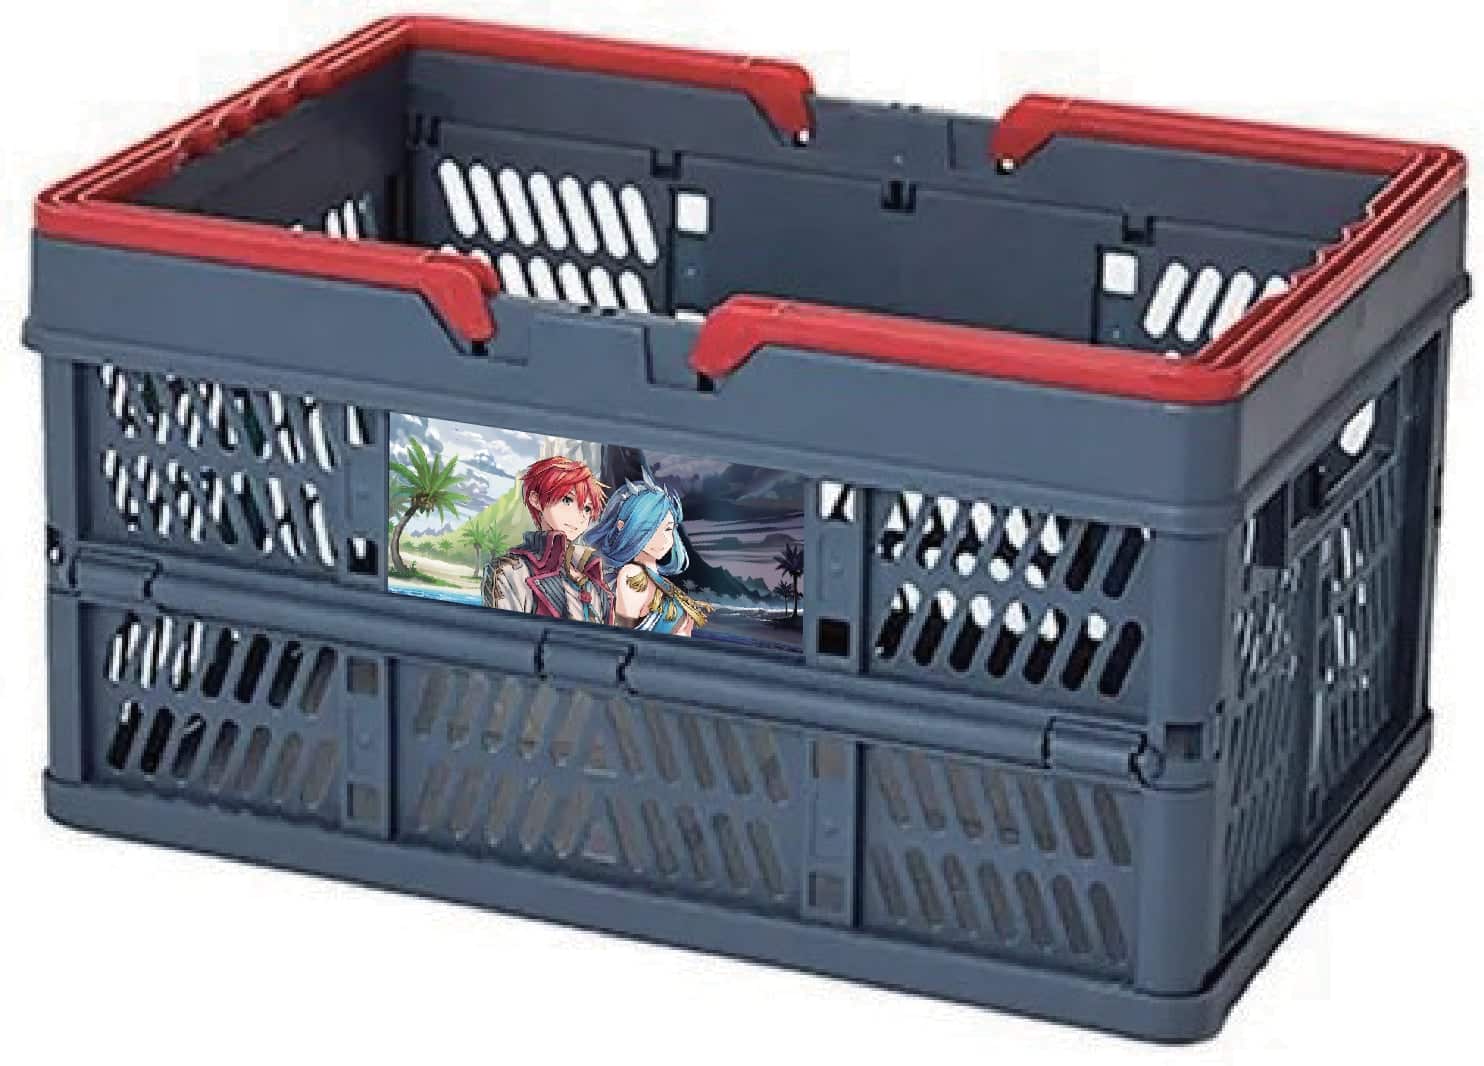 Official Ys VIII: Lacrimosa of Dana Shopping Containers Being Sold in Japan; We’re Really Scraping the Bottom of the Barrel, Huh